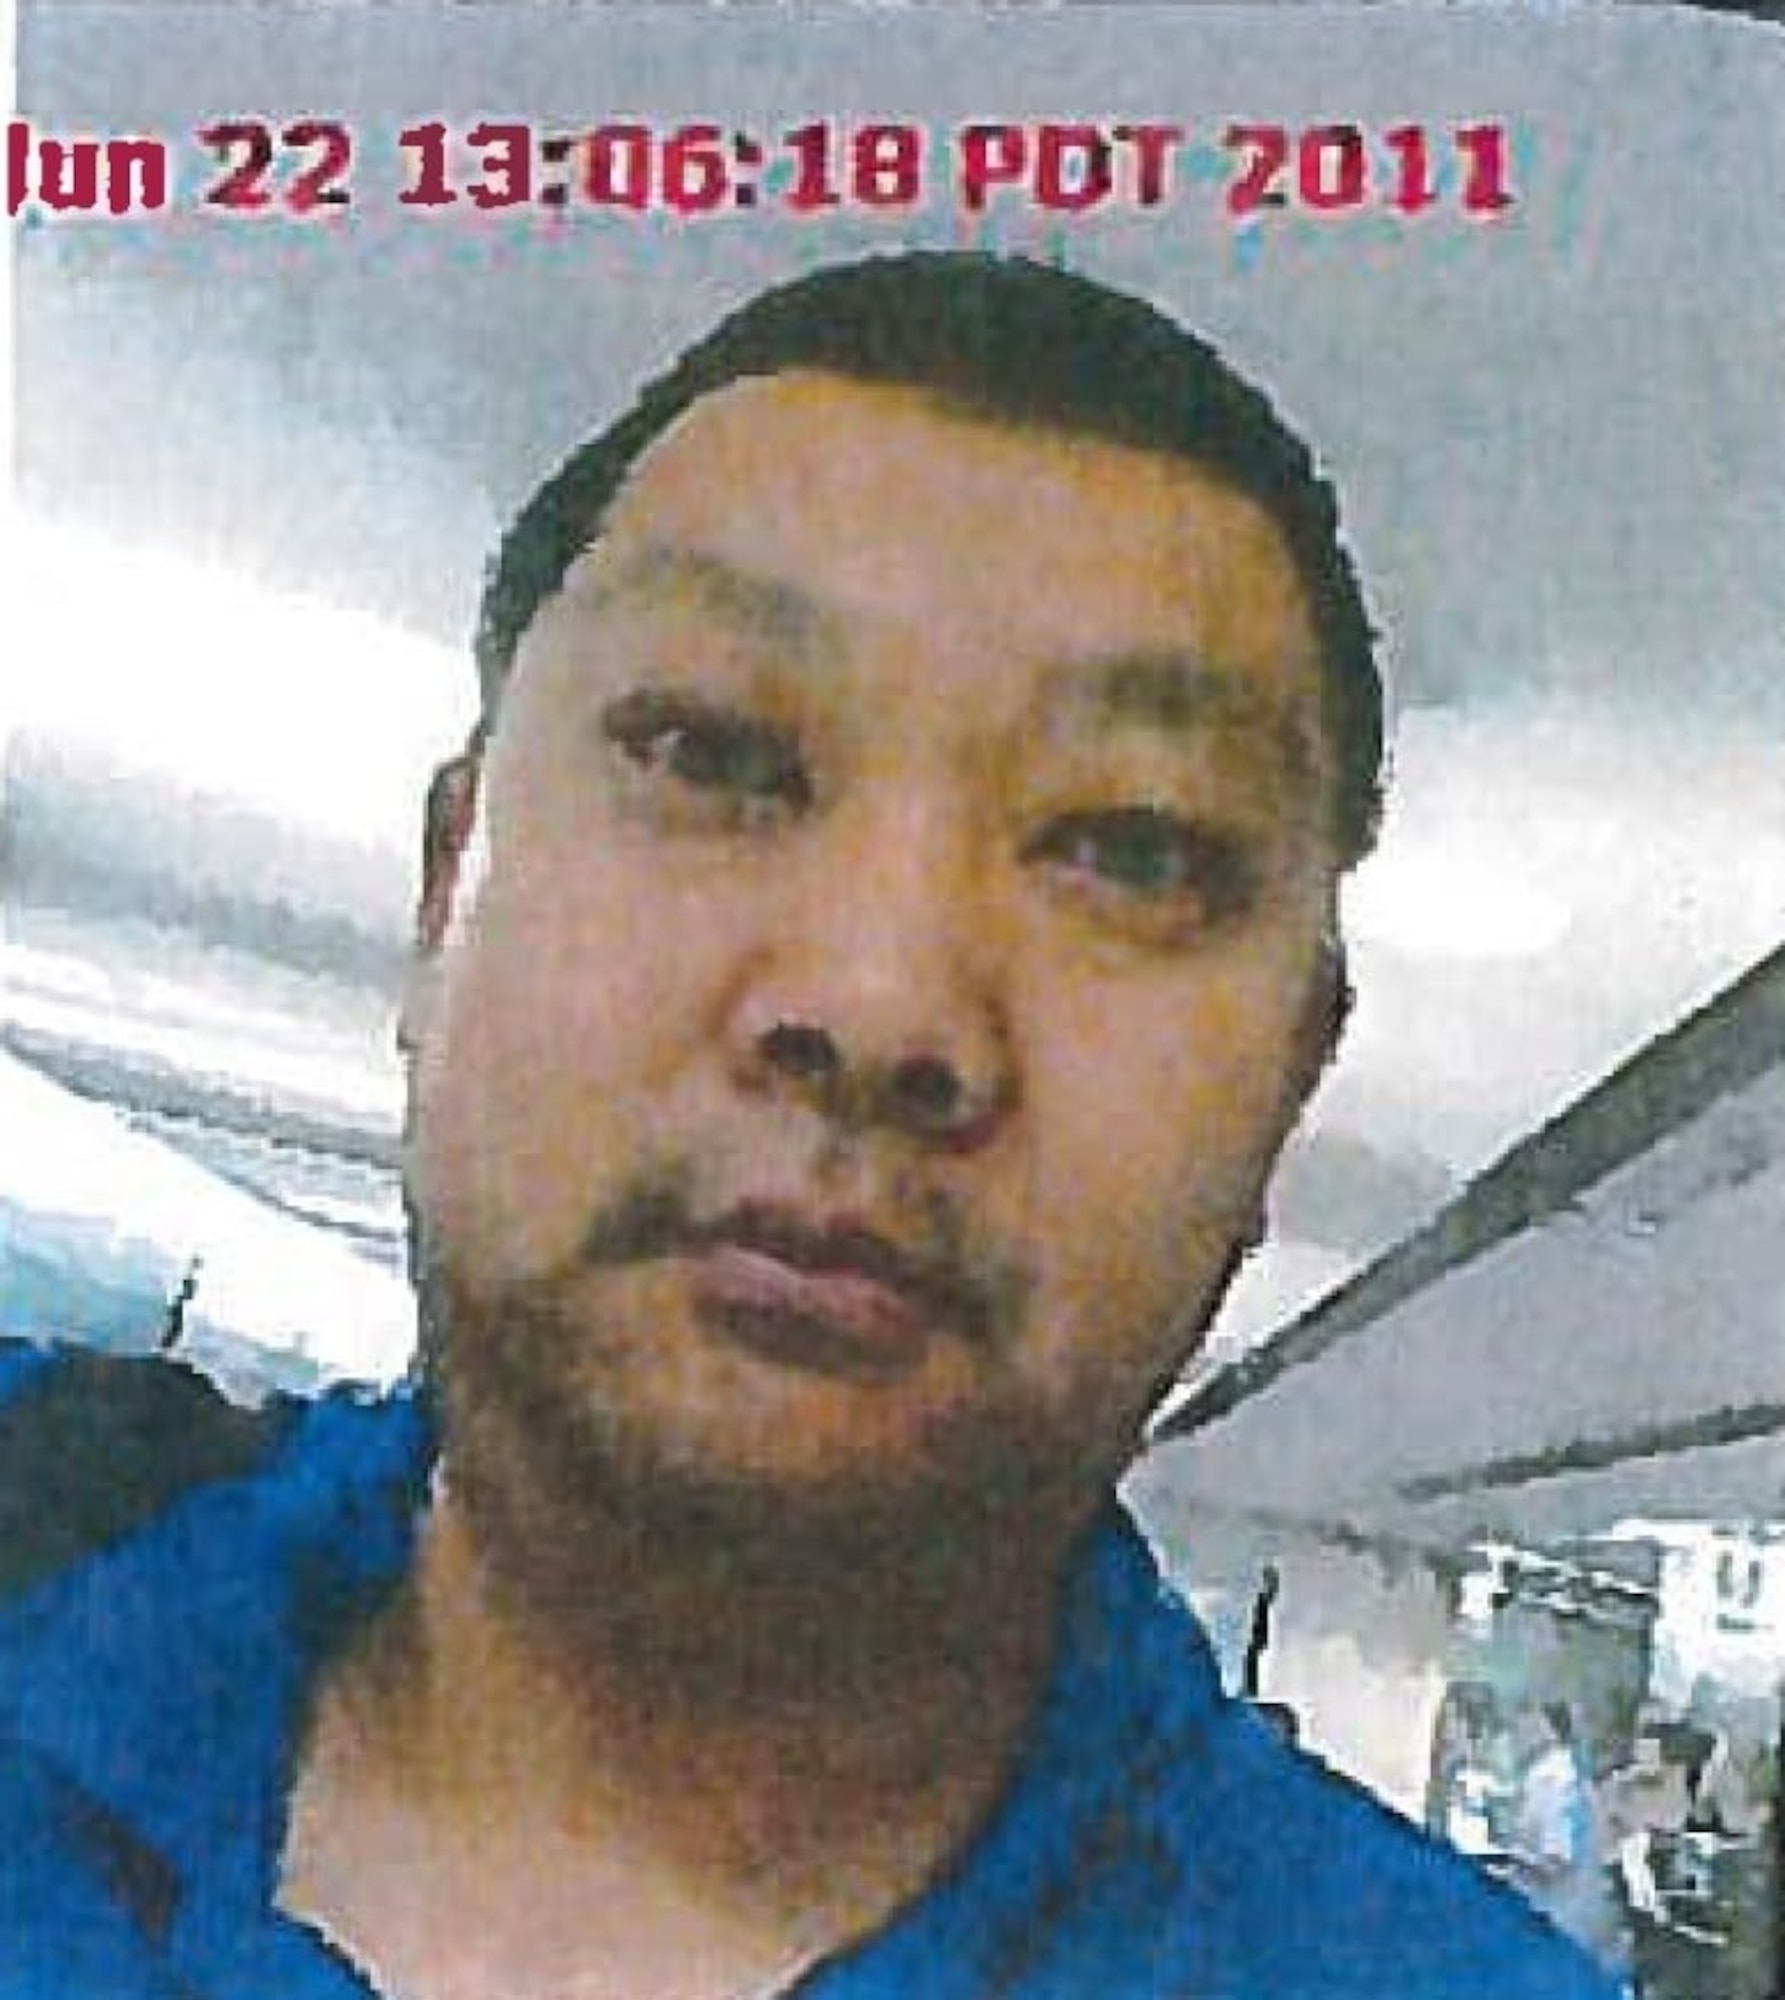 Su Bin, a citizen of China and at the time a permanent resident of Canada, is shown at a U.S. border crossing in 2011. (FBI photo)